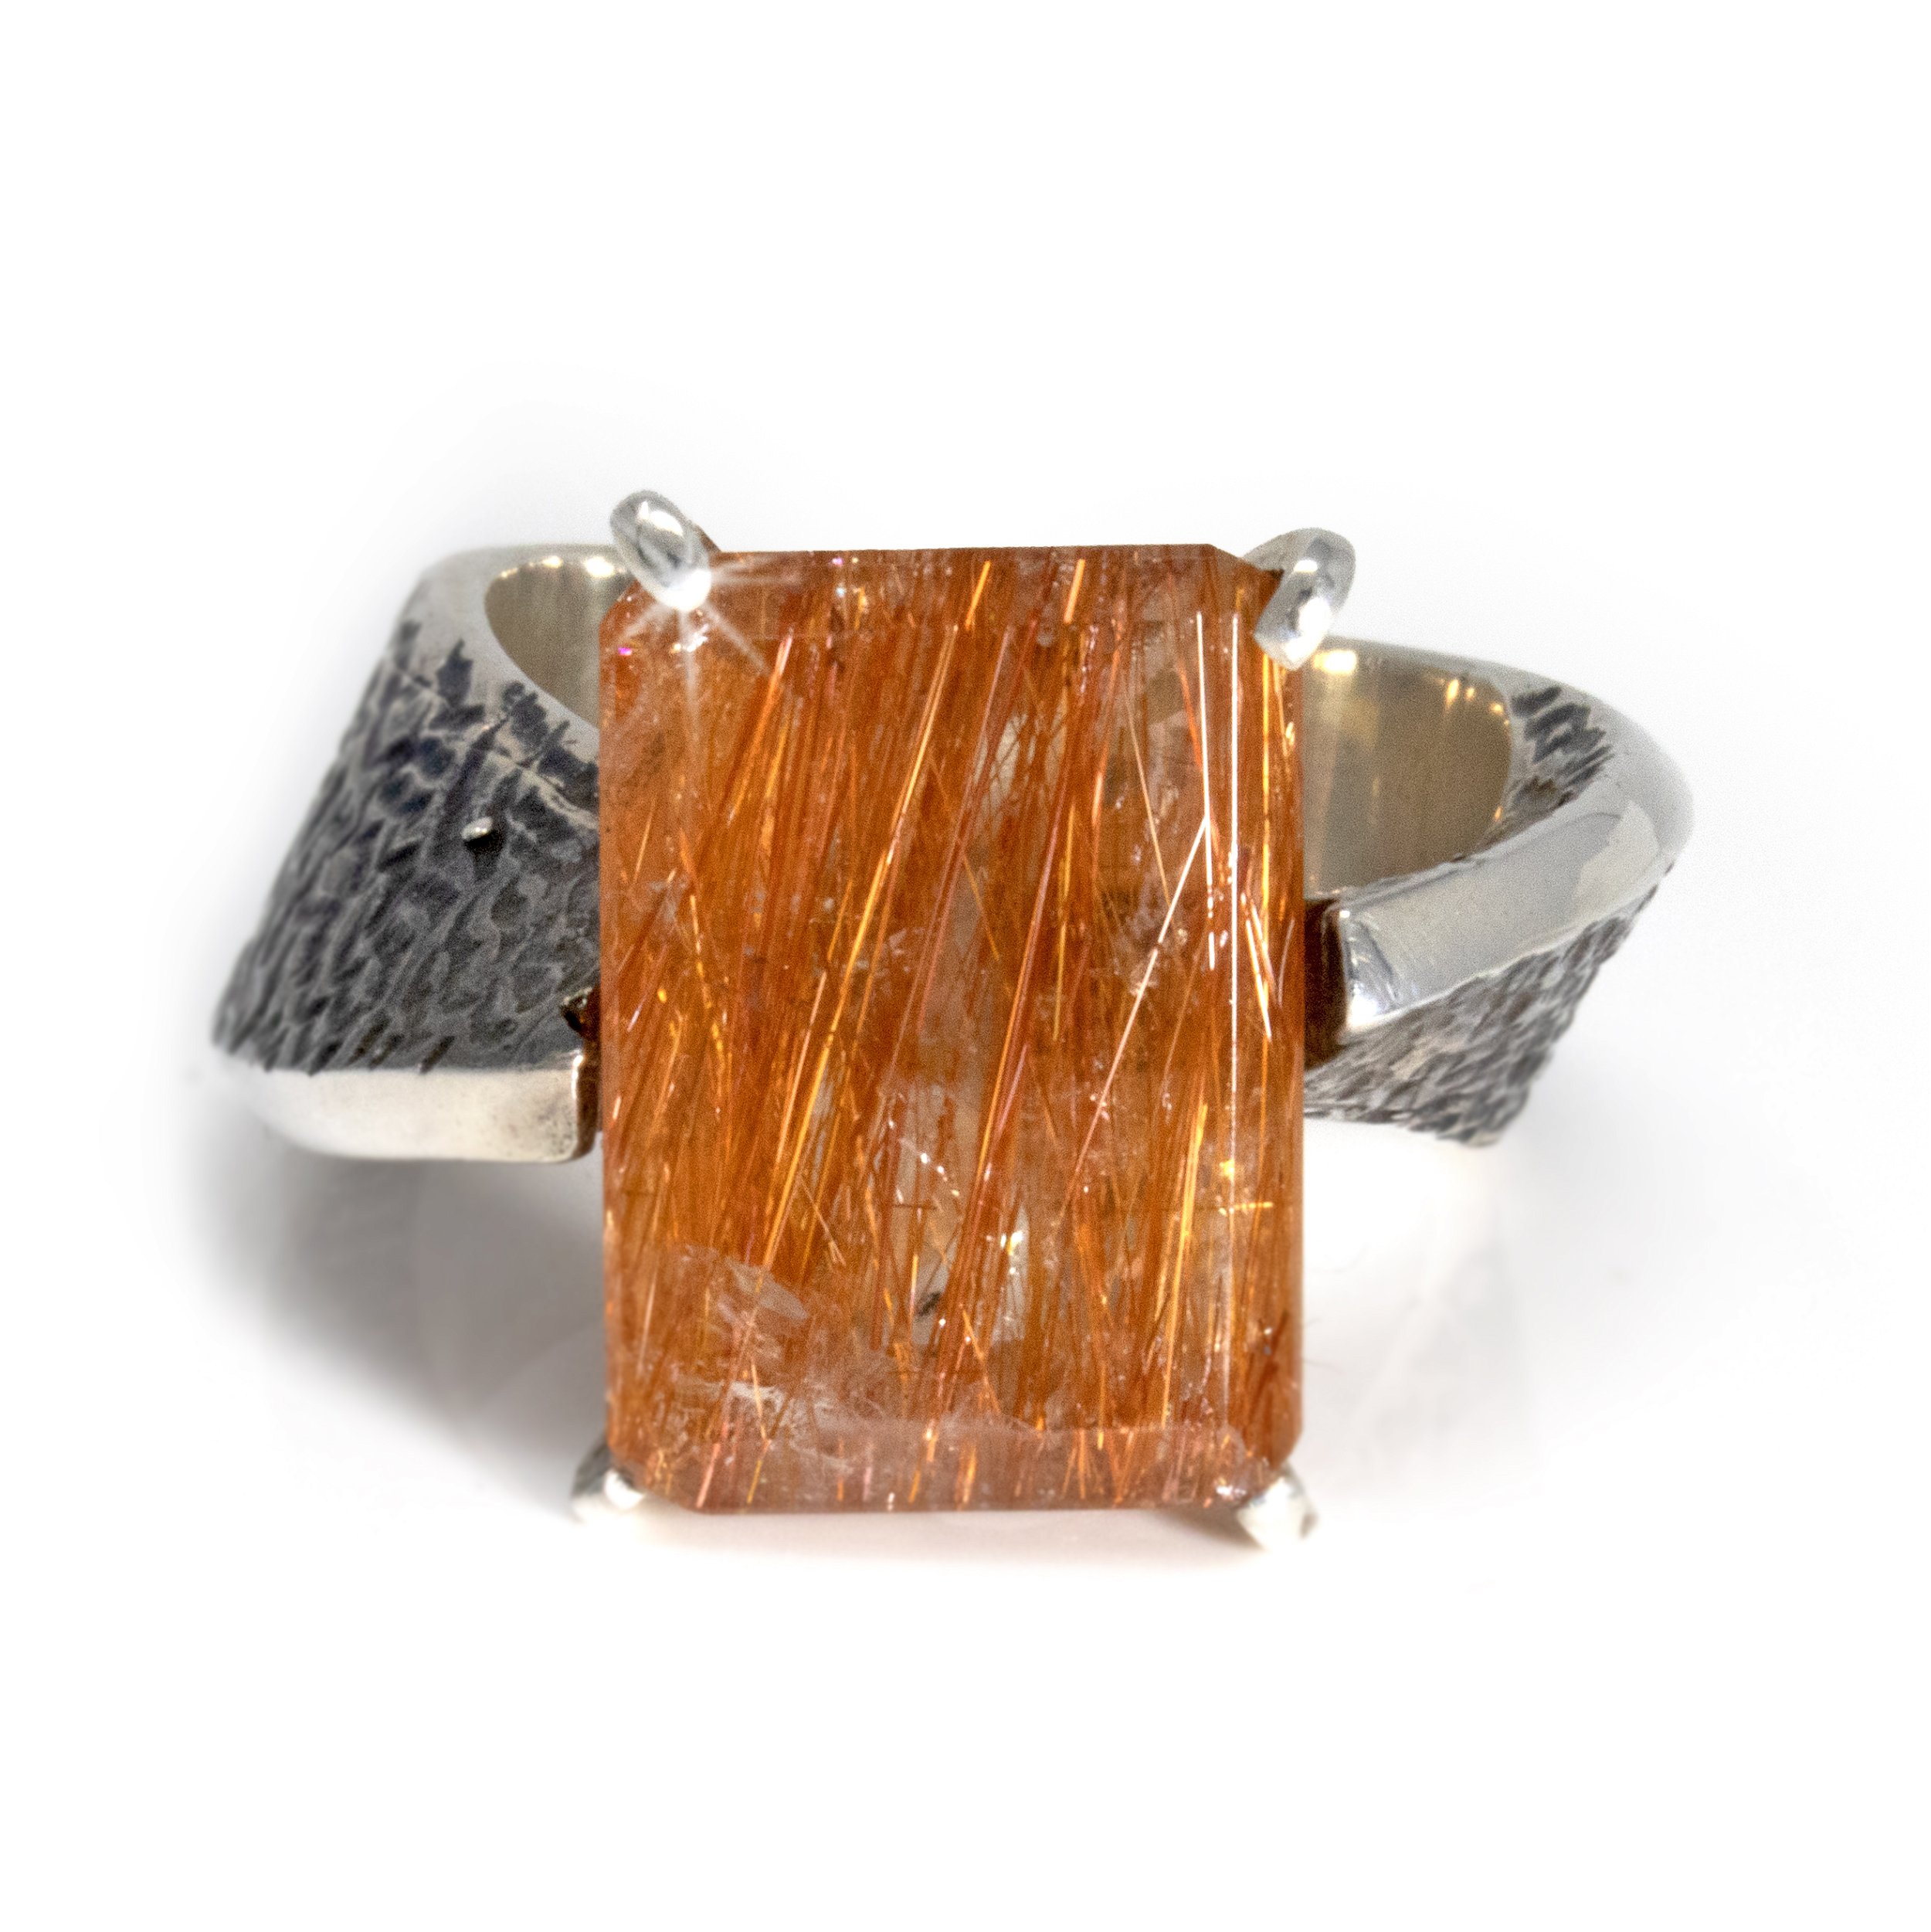 Faceted Golden Rutile Quartz Ring - Simple Rectangle Prong Set On Twisted Band With Stamped Detail & Oxidized Finish Size 8